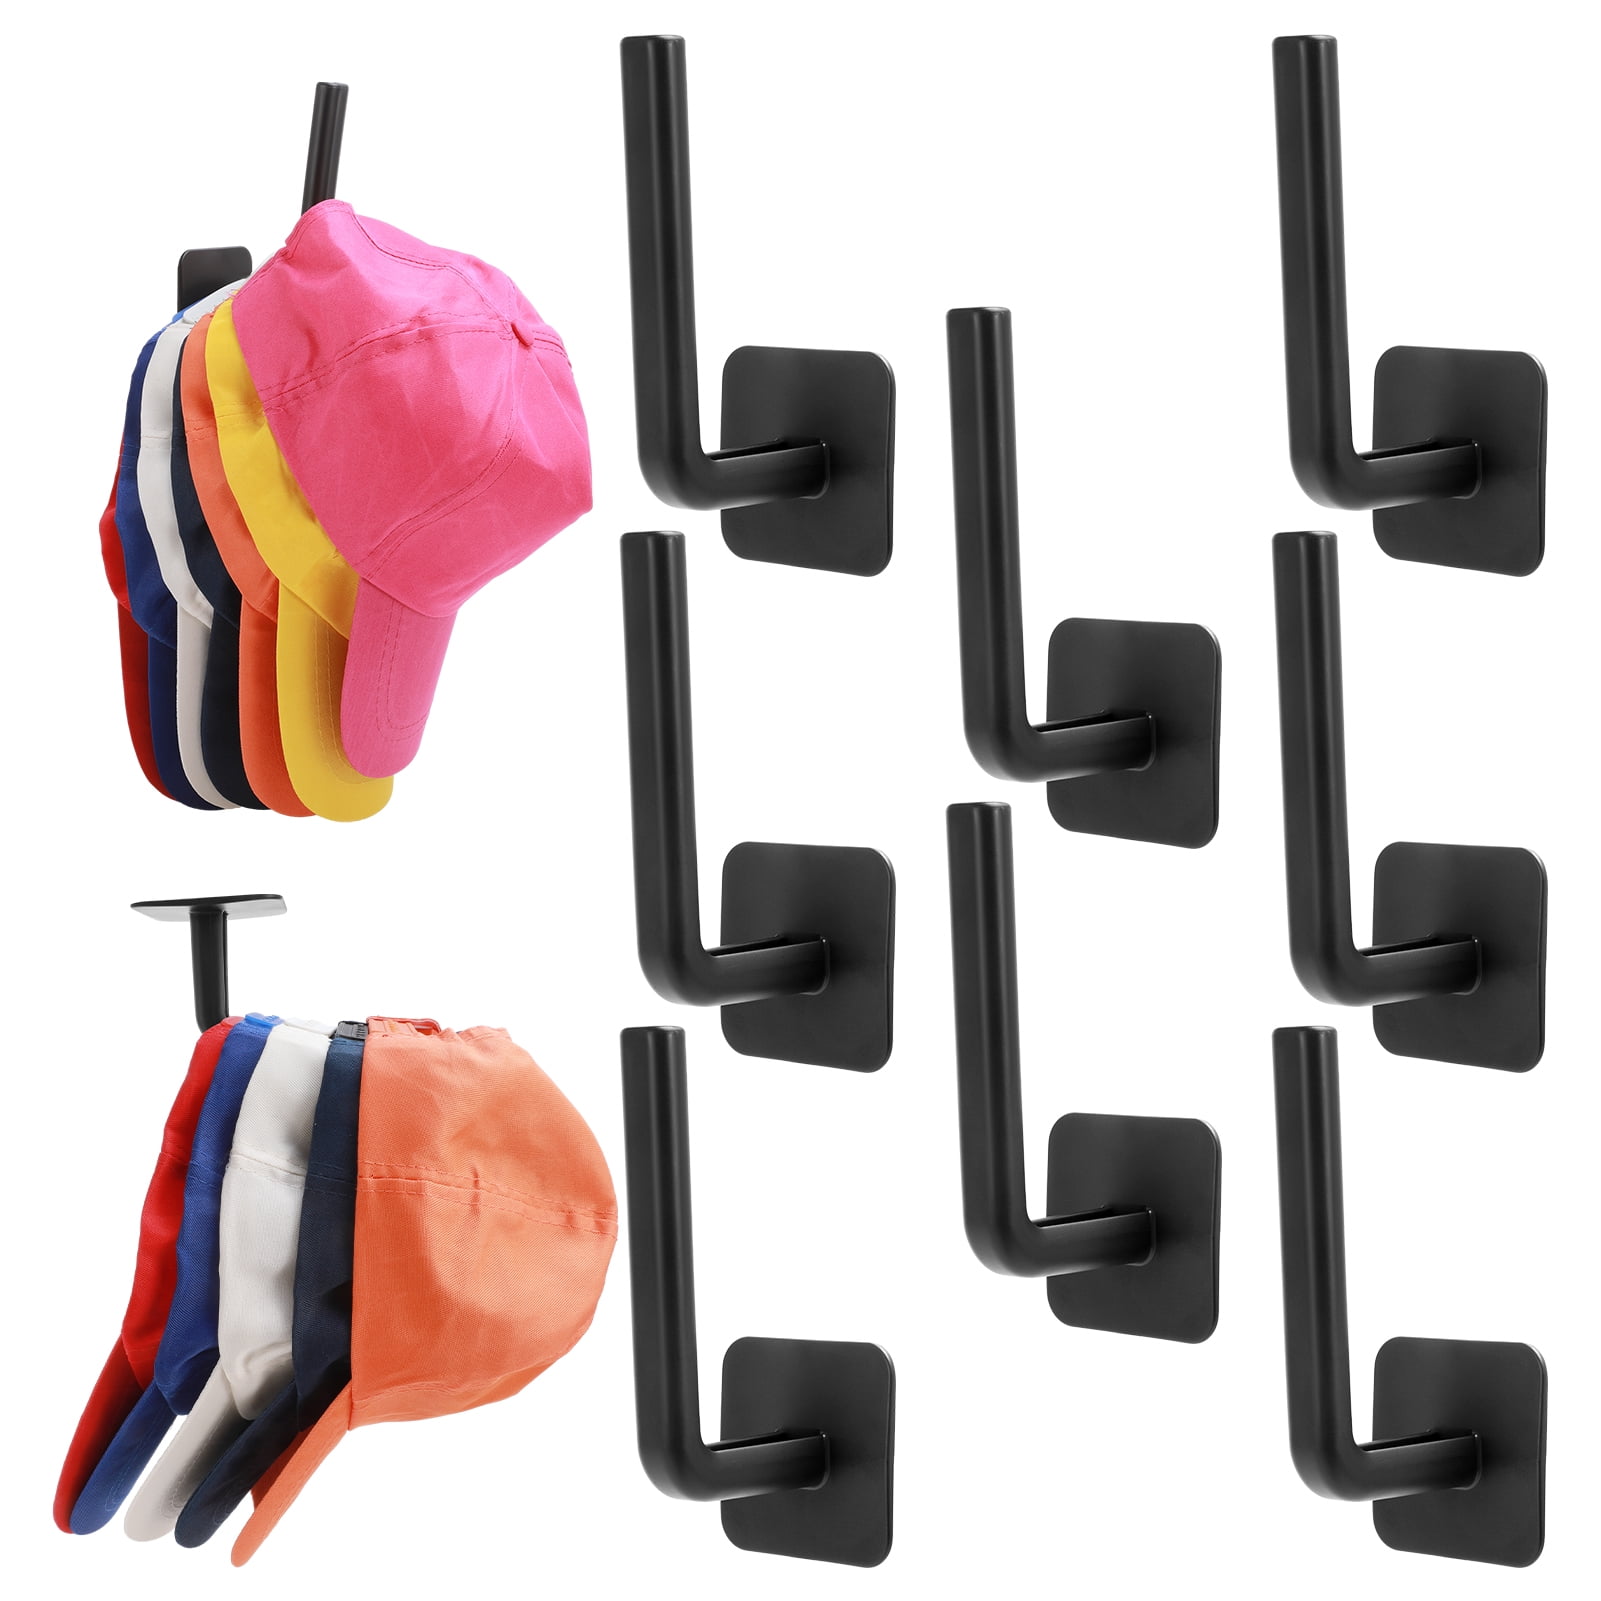 Modern JP Adhesive Hat Hooks for Wall (16-Pack) - Minimalist Hat Rack  Design, No Drilling, Strong Hold Hat Hangers - U.S. Patent Pending, Black 